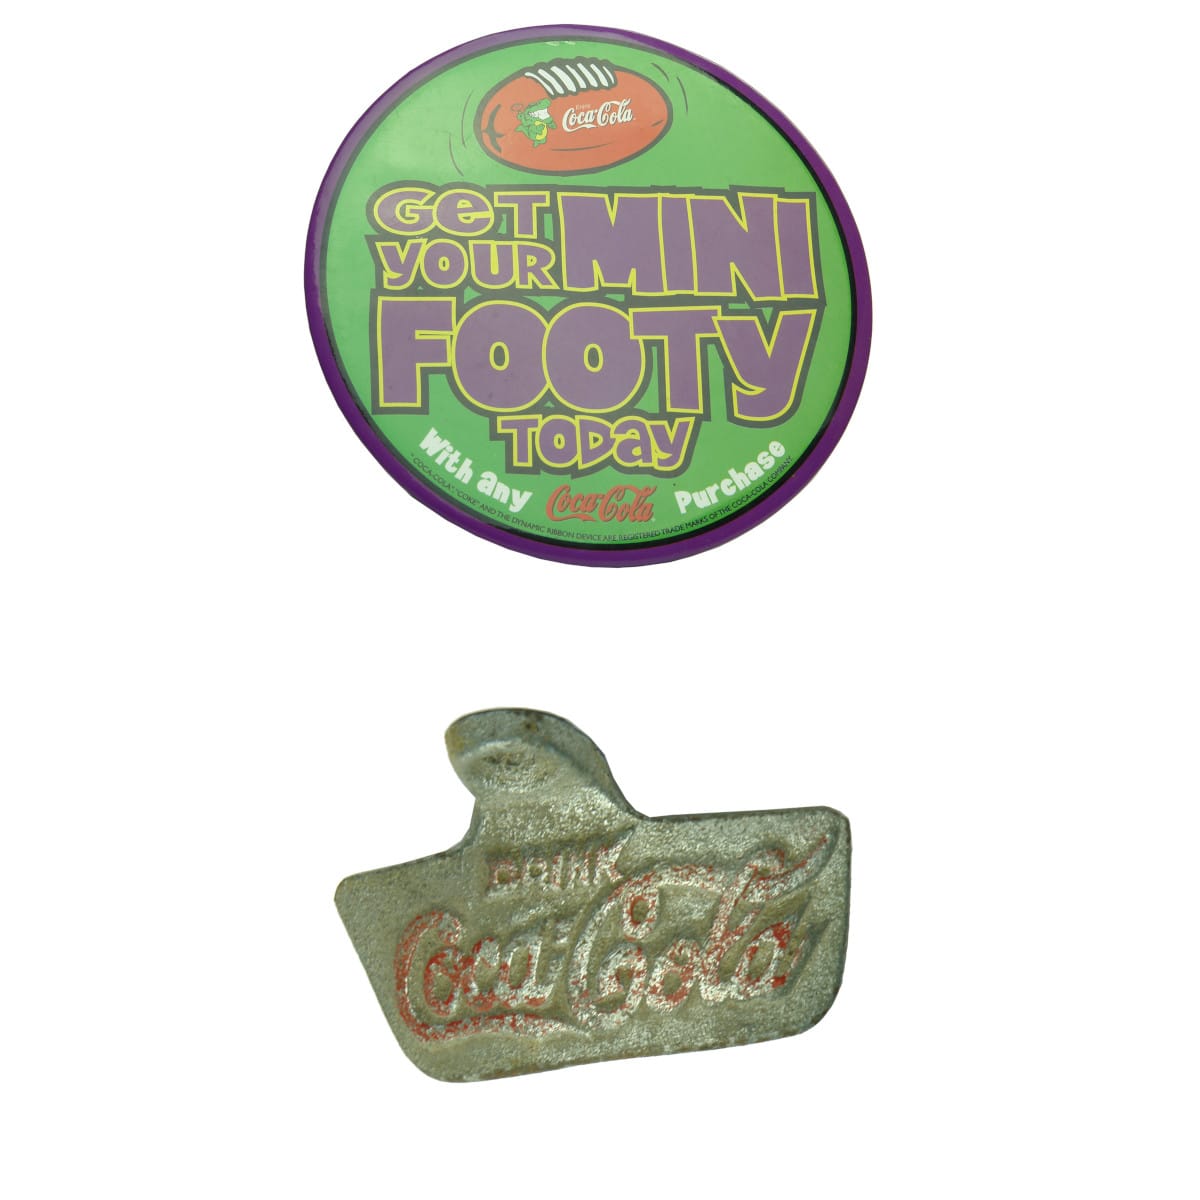 Two Coca Cola Items: Large promotional badge and a counter mounted Bottle Opener.